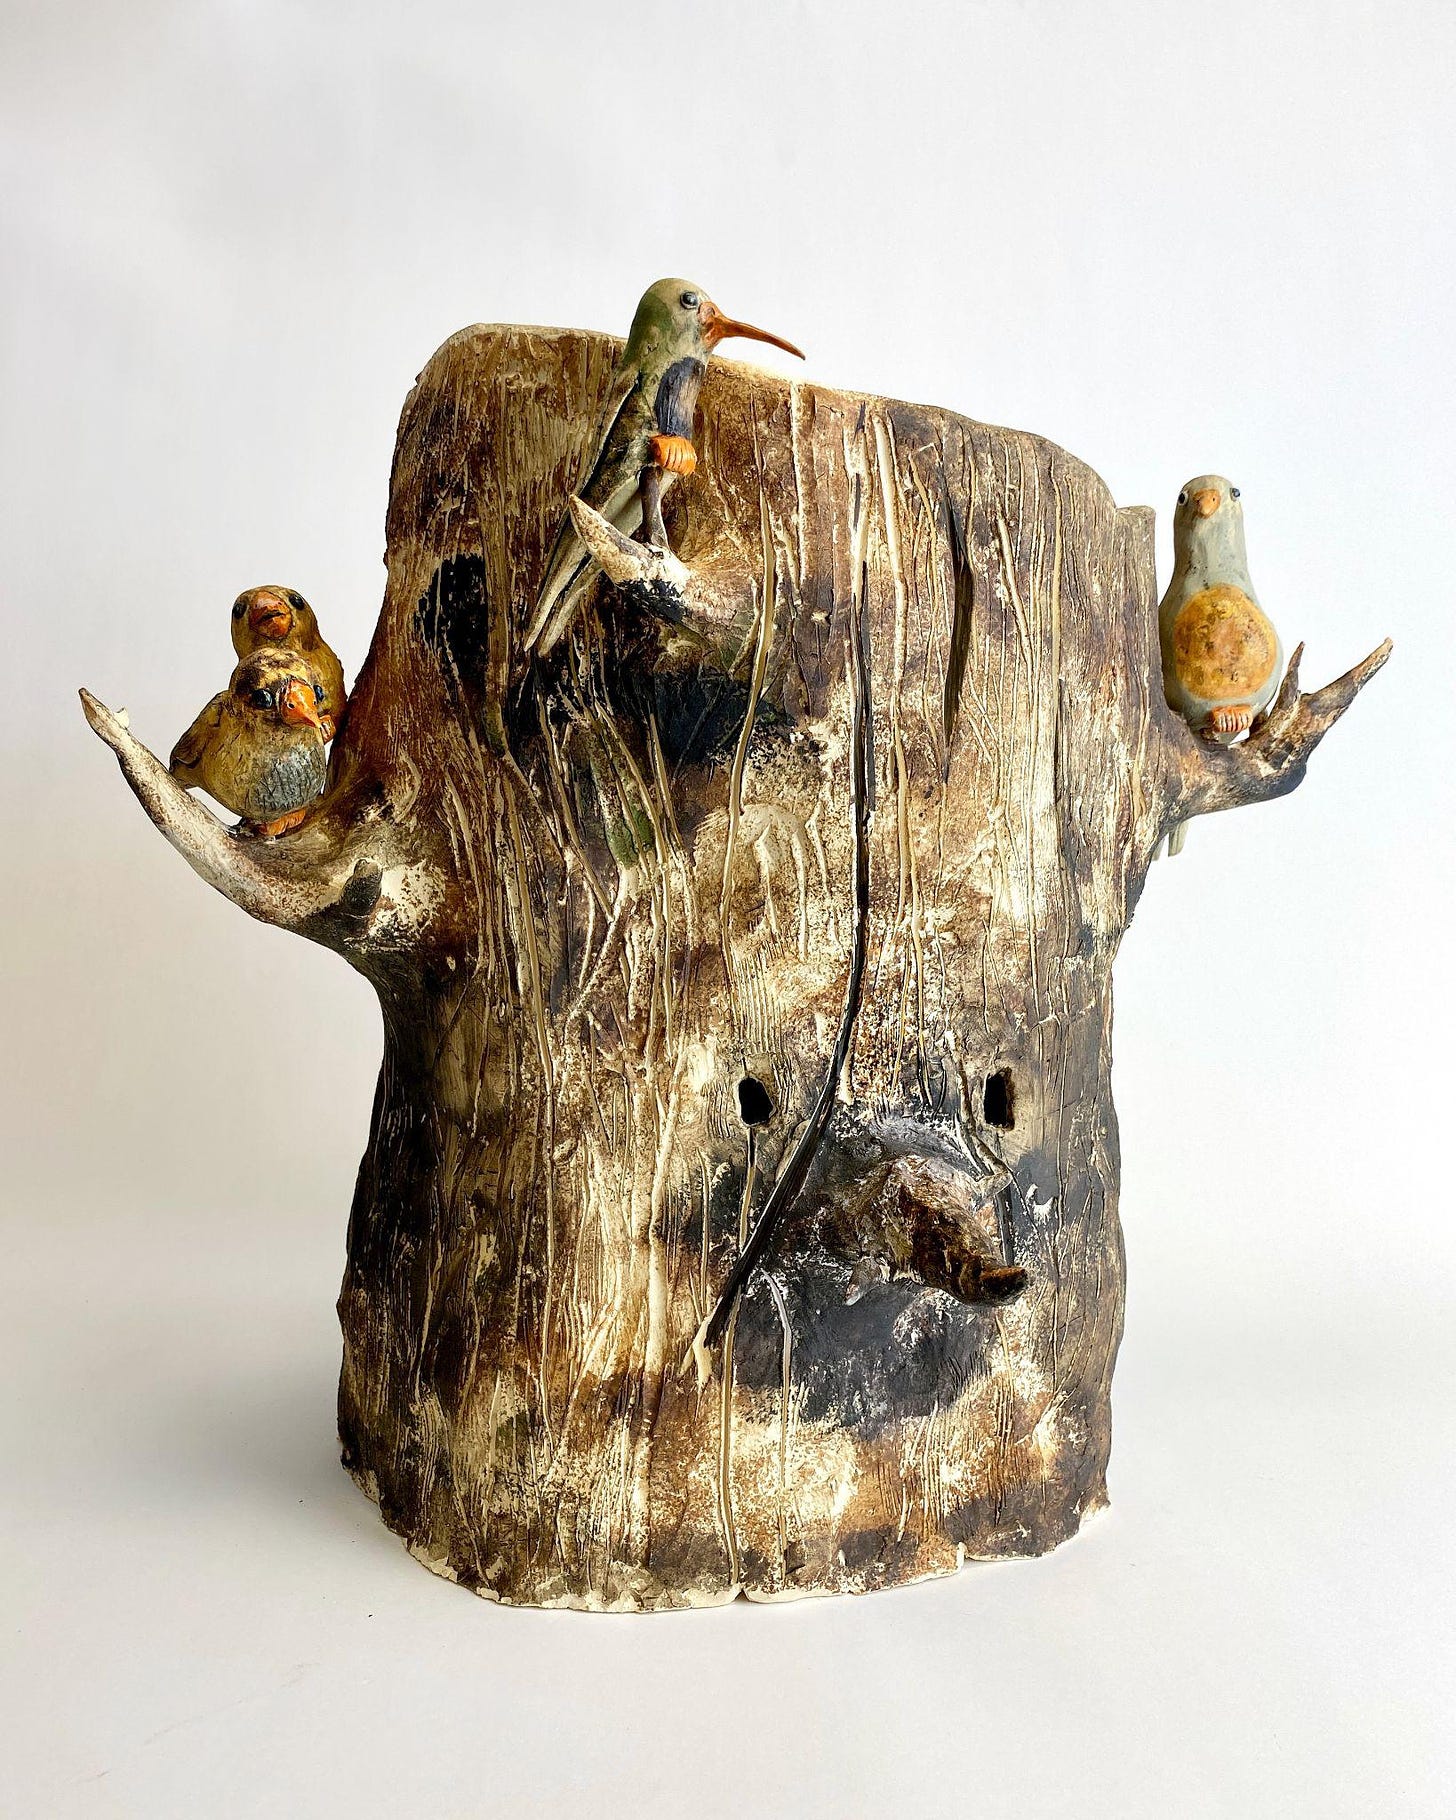 Ceramic tree stump mask with birds on branches